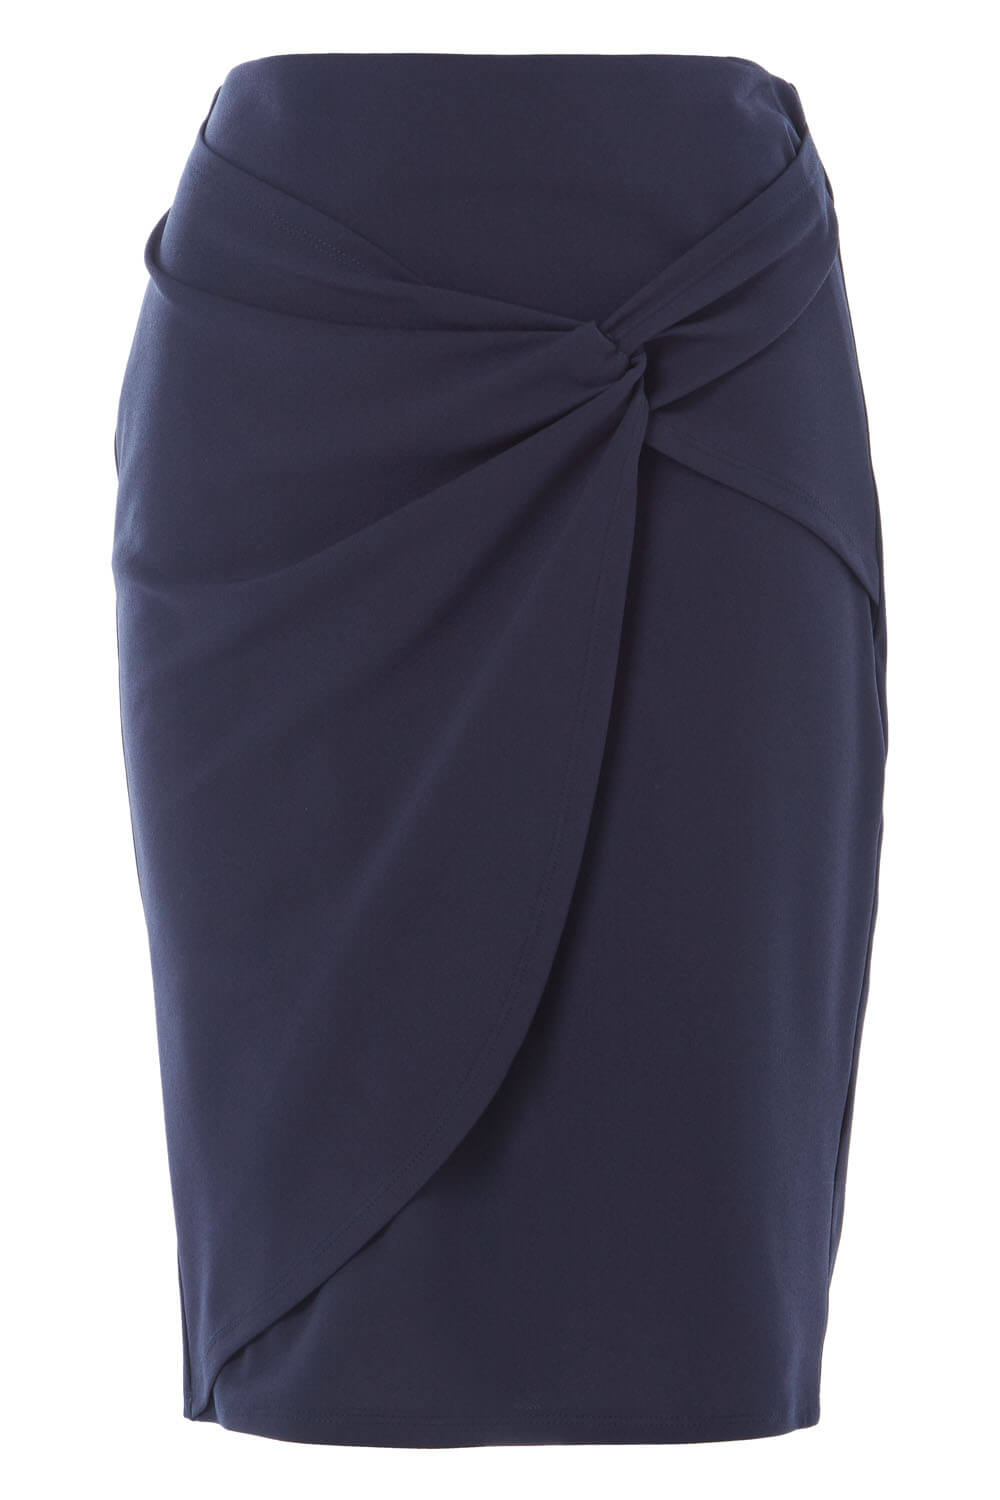 Navy  Knot Front Pencil Skirt, Image 5 of 5